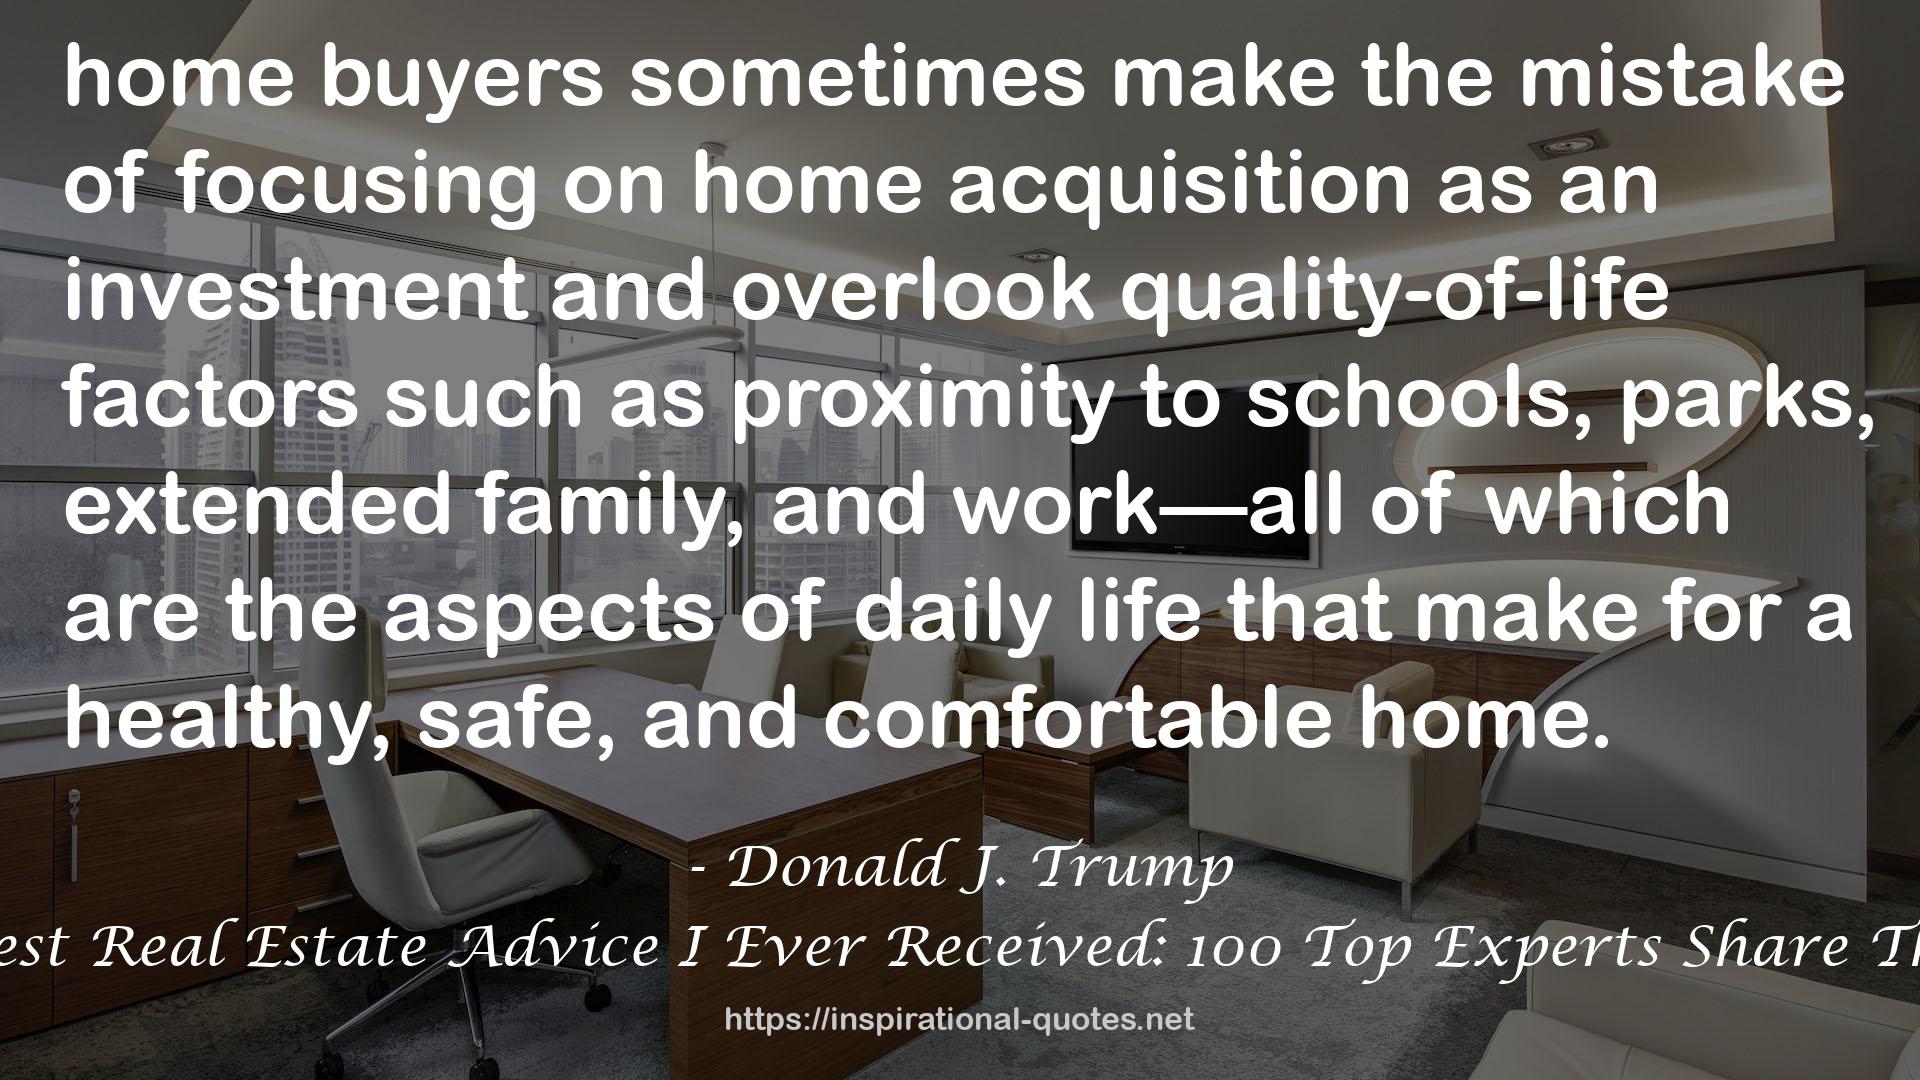 Trump: The Best Real Estate Advice I Ever Received: 100 Top Experts Share Their Strategies QUOTES